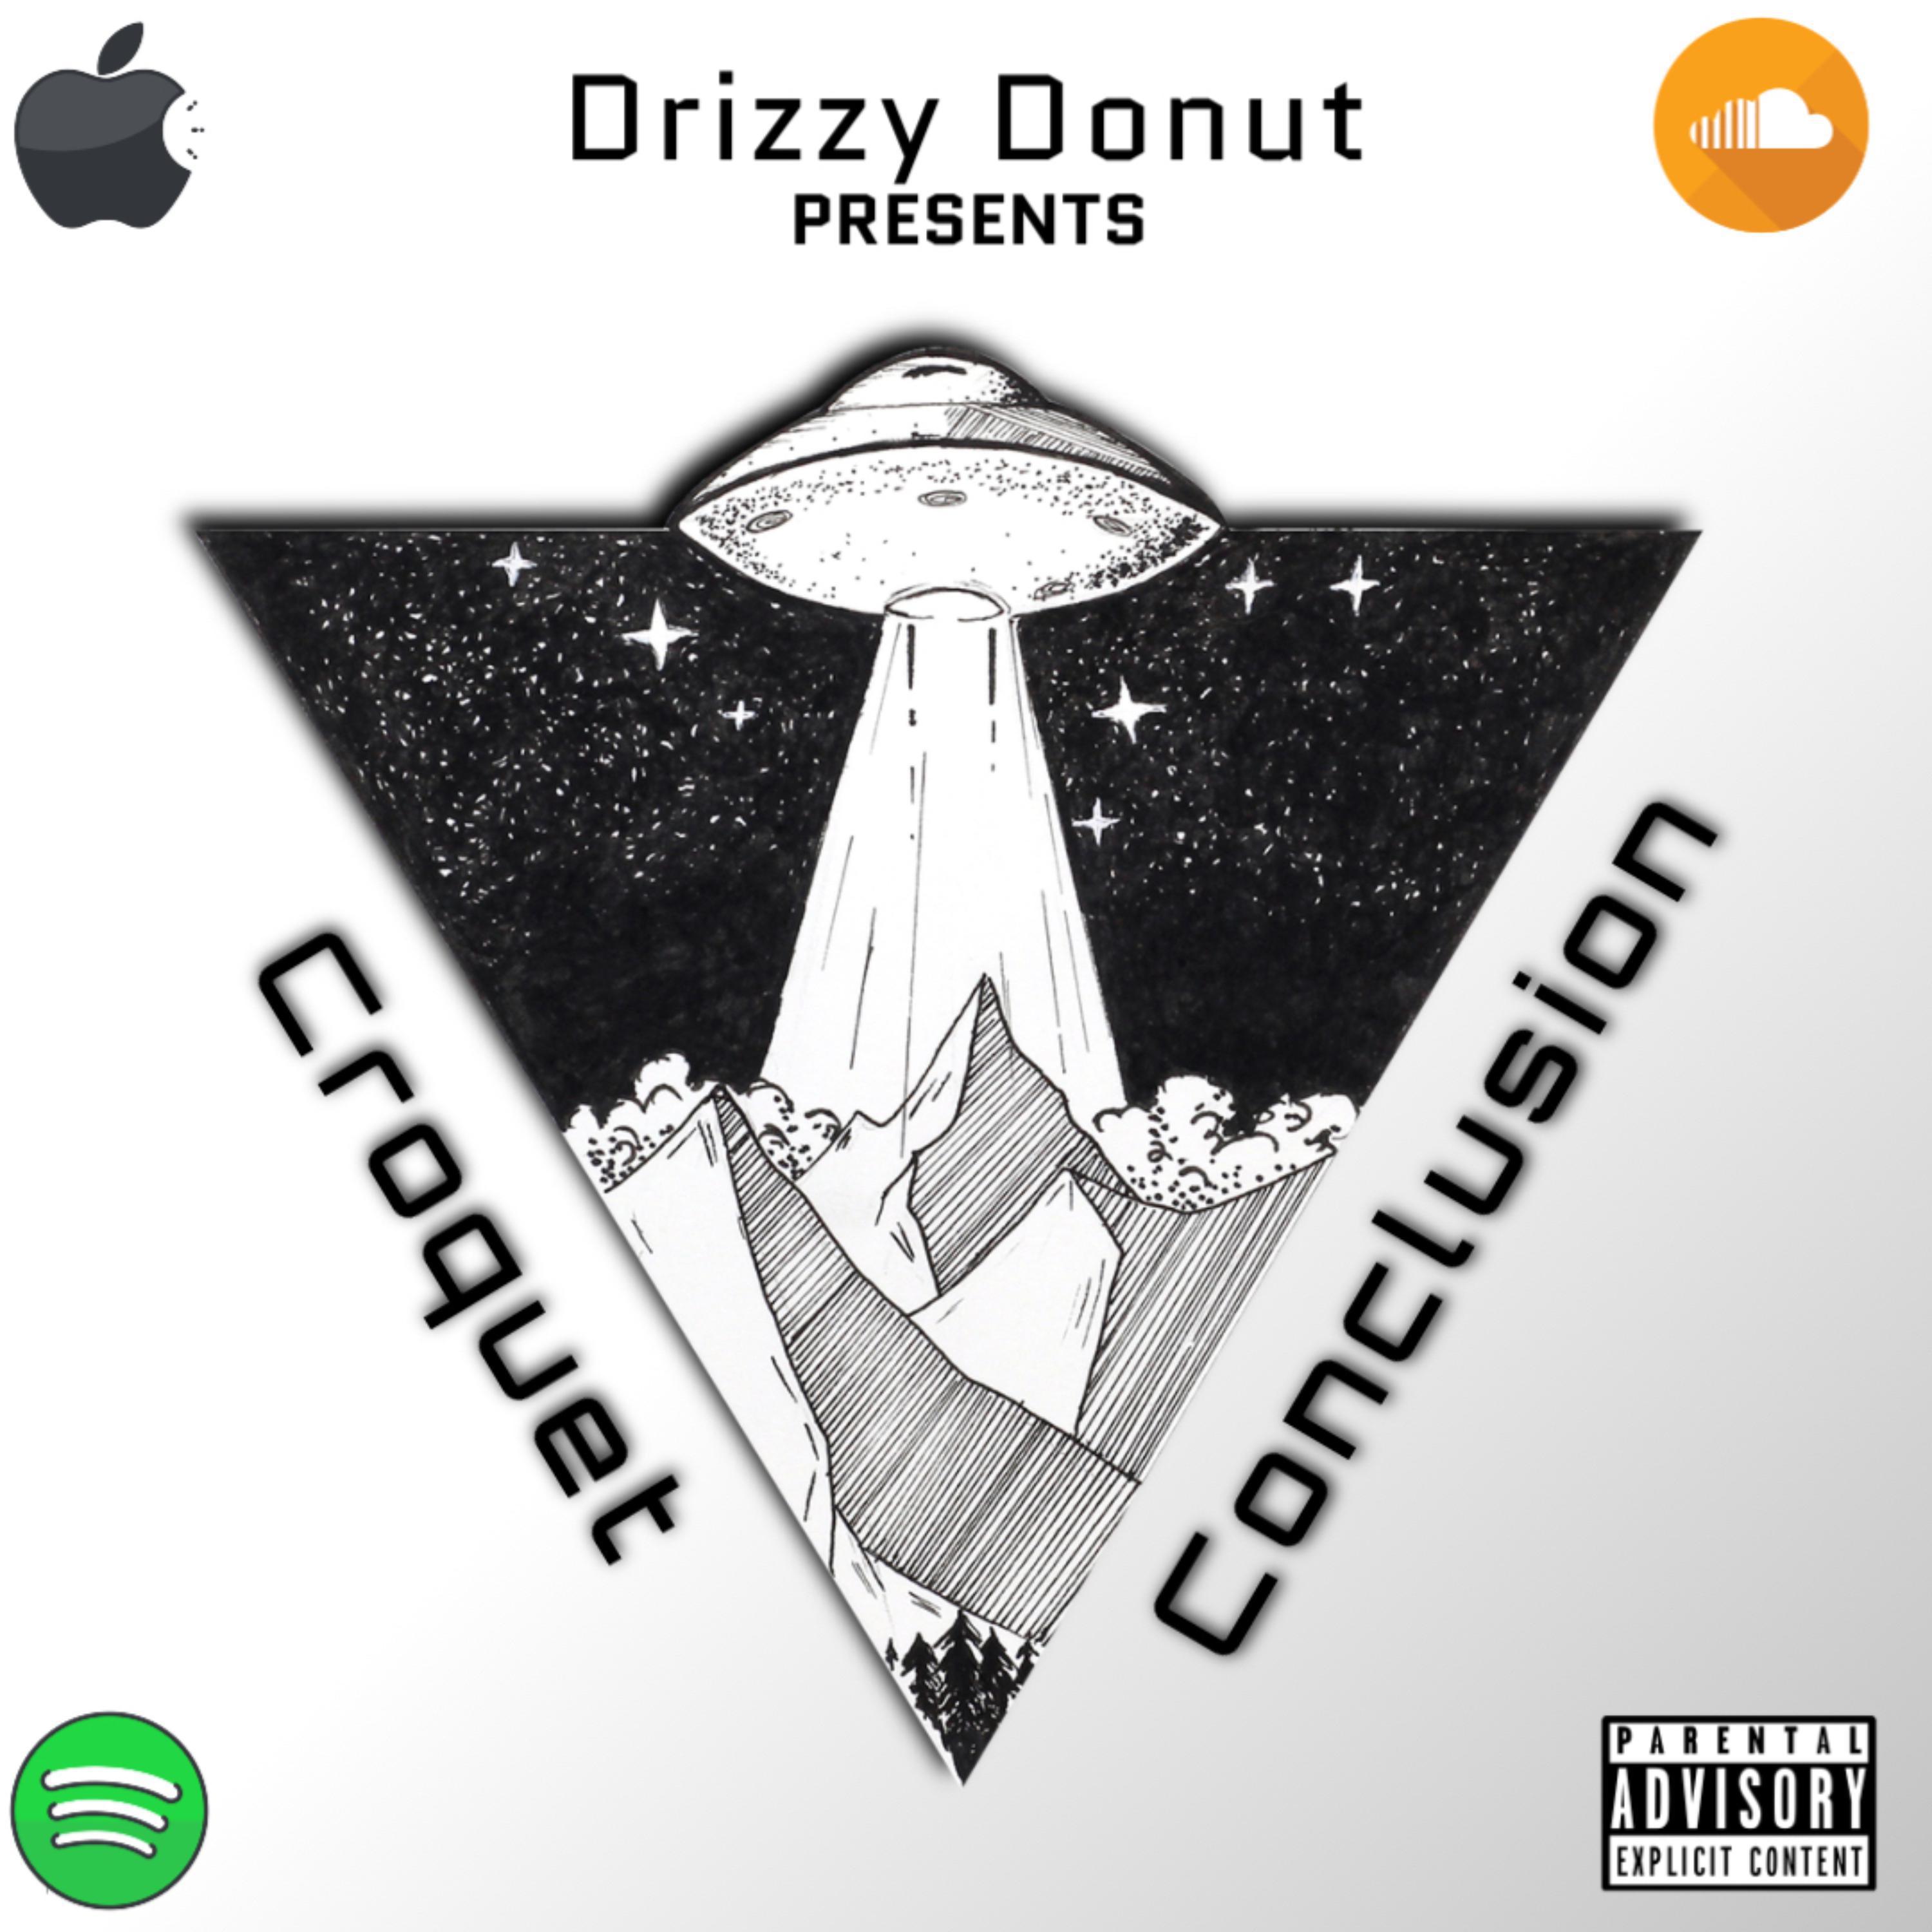 Drizzy Donut - Croquet Conclusion